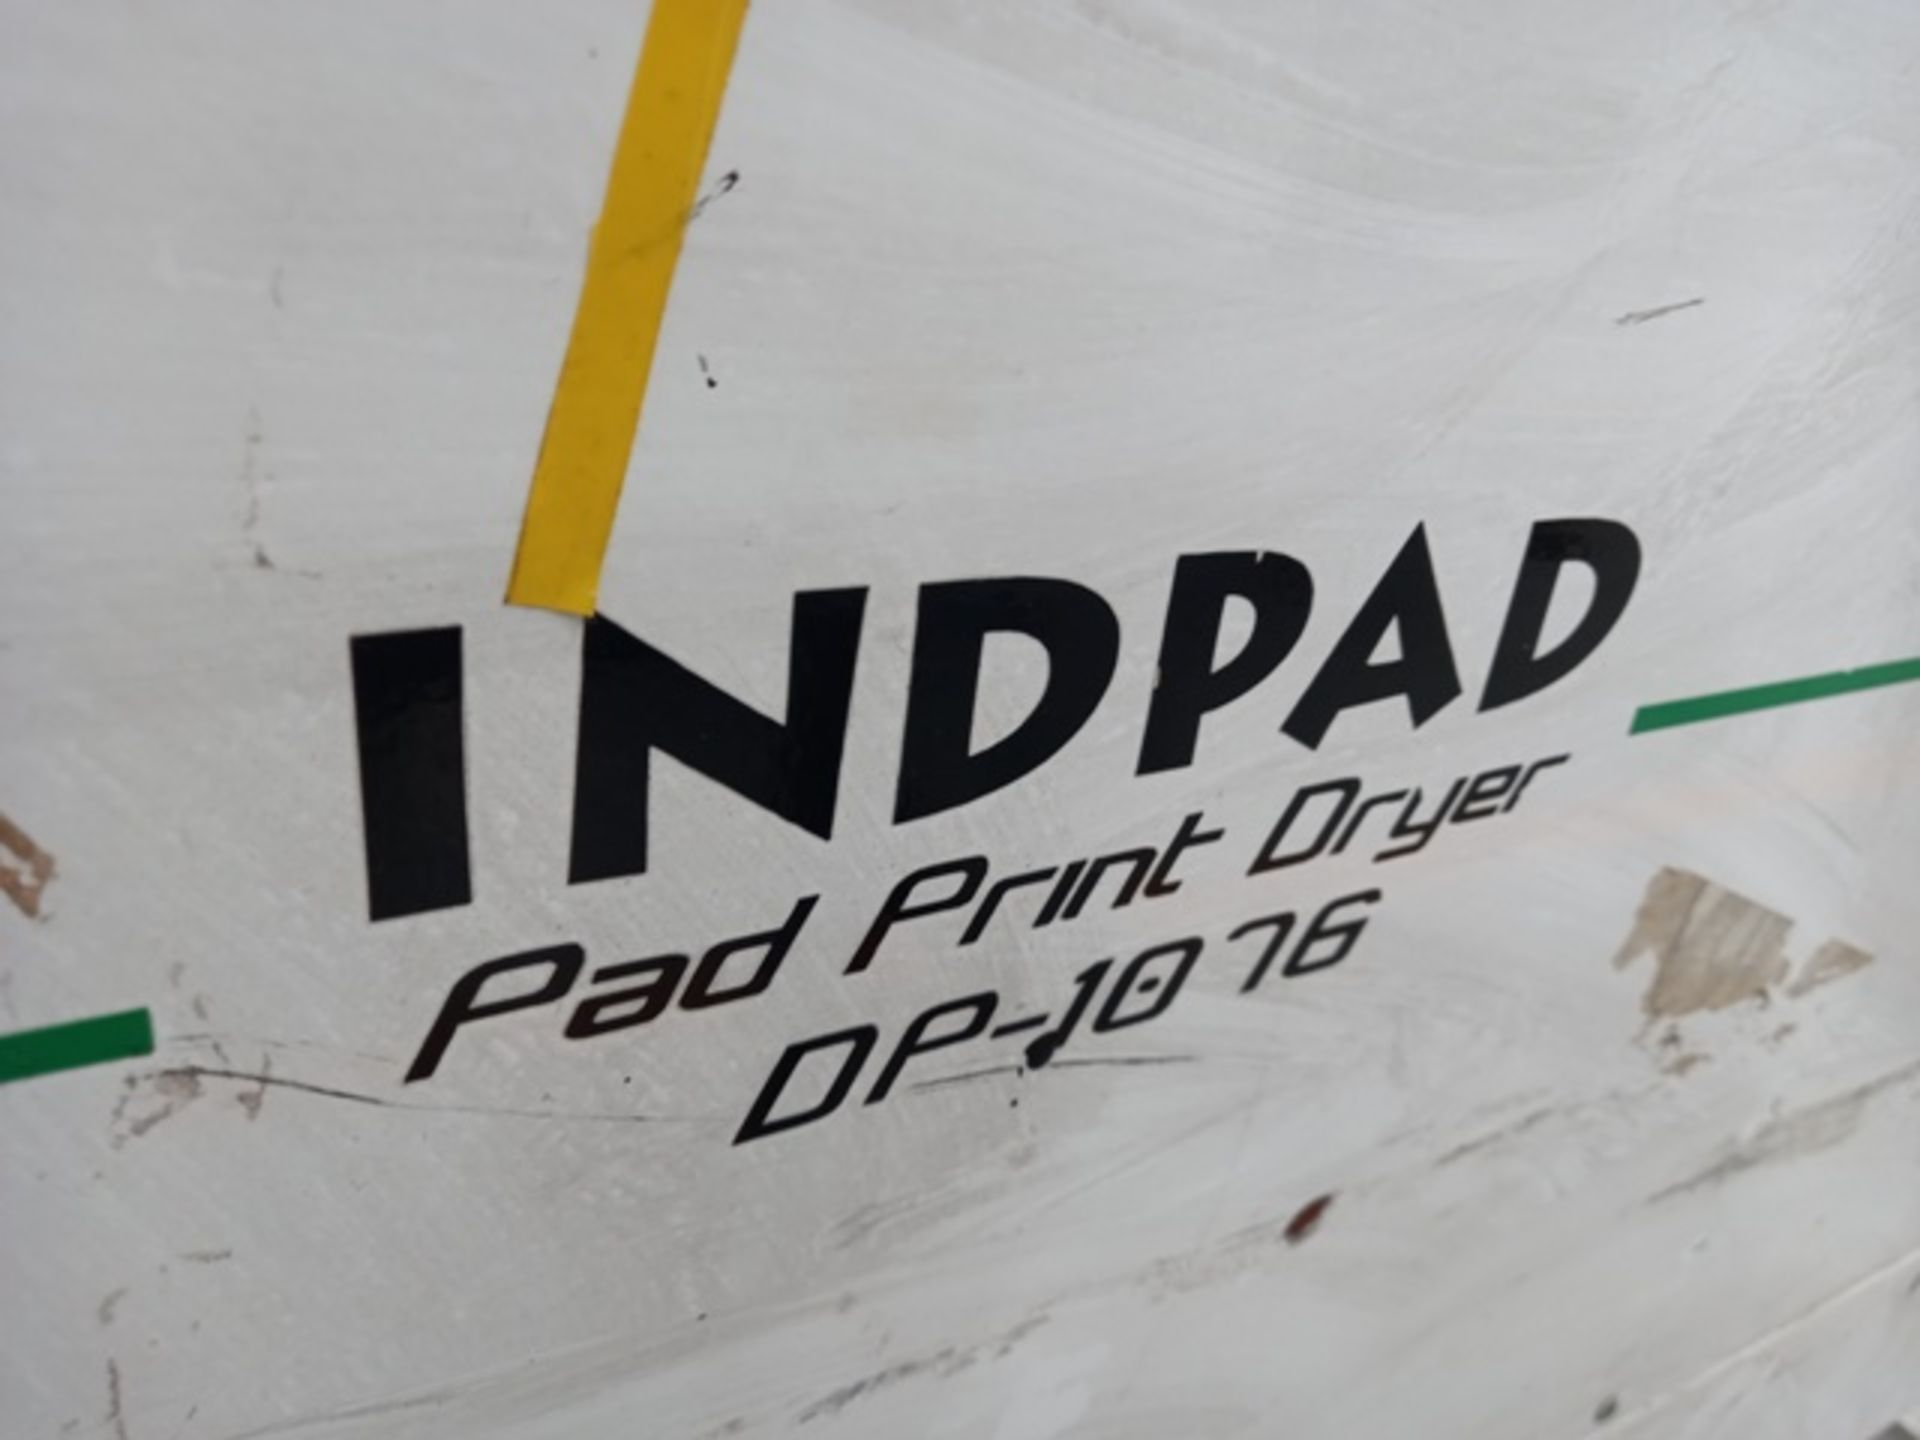 Lot Consisting of: (2) Indpad DP-1000 / DP-1076 Curing Tunnels, Mfg. 2015 - Image 12 of 12